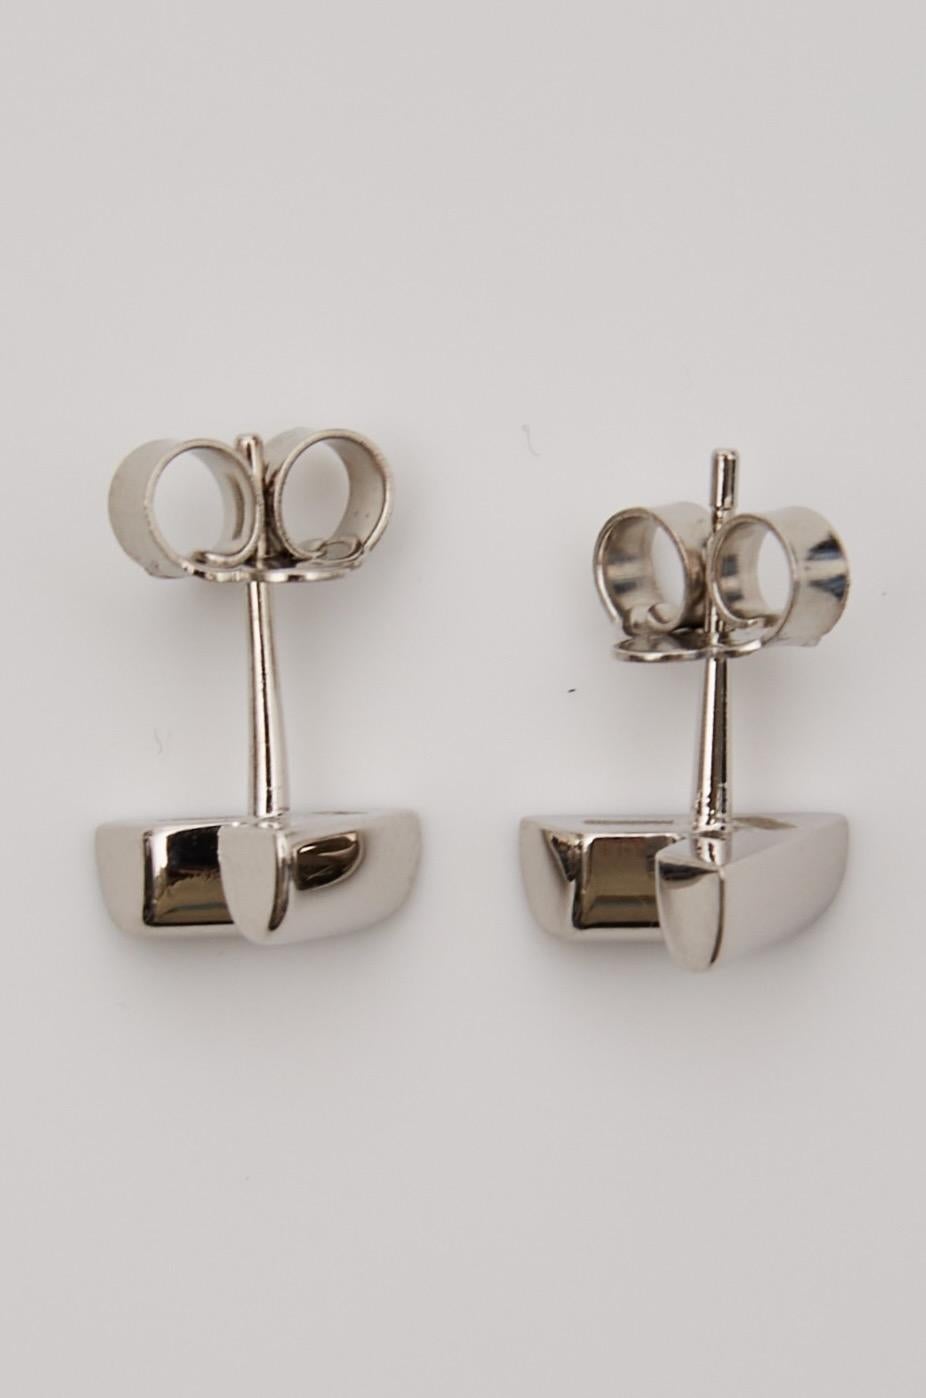 LOUIS VUITTON SILVER LOGO ESSENTIAL V STUD EARRINGS

These Louis earrings feature a discreet V signature and a shiny silver-color finish. The essential V earrings are in tune with the times. These sleek and versatile earrings combine Louis Vuitton's